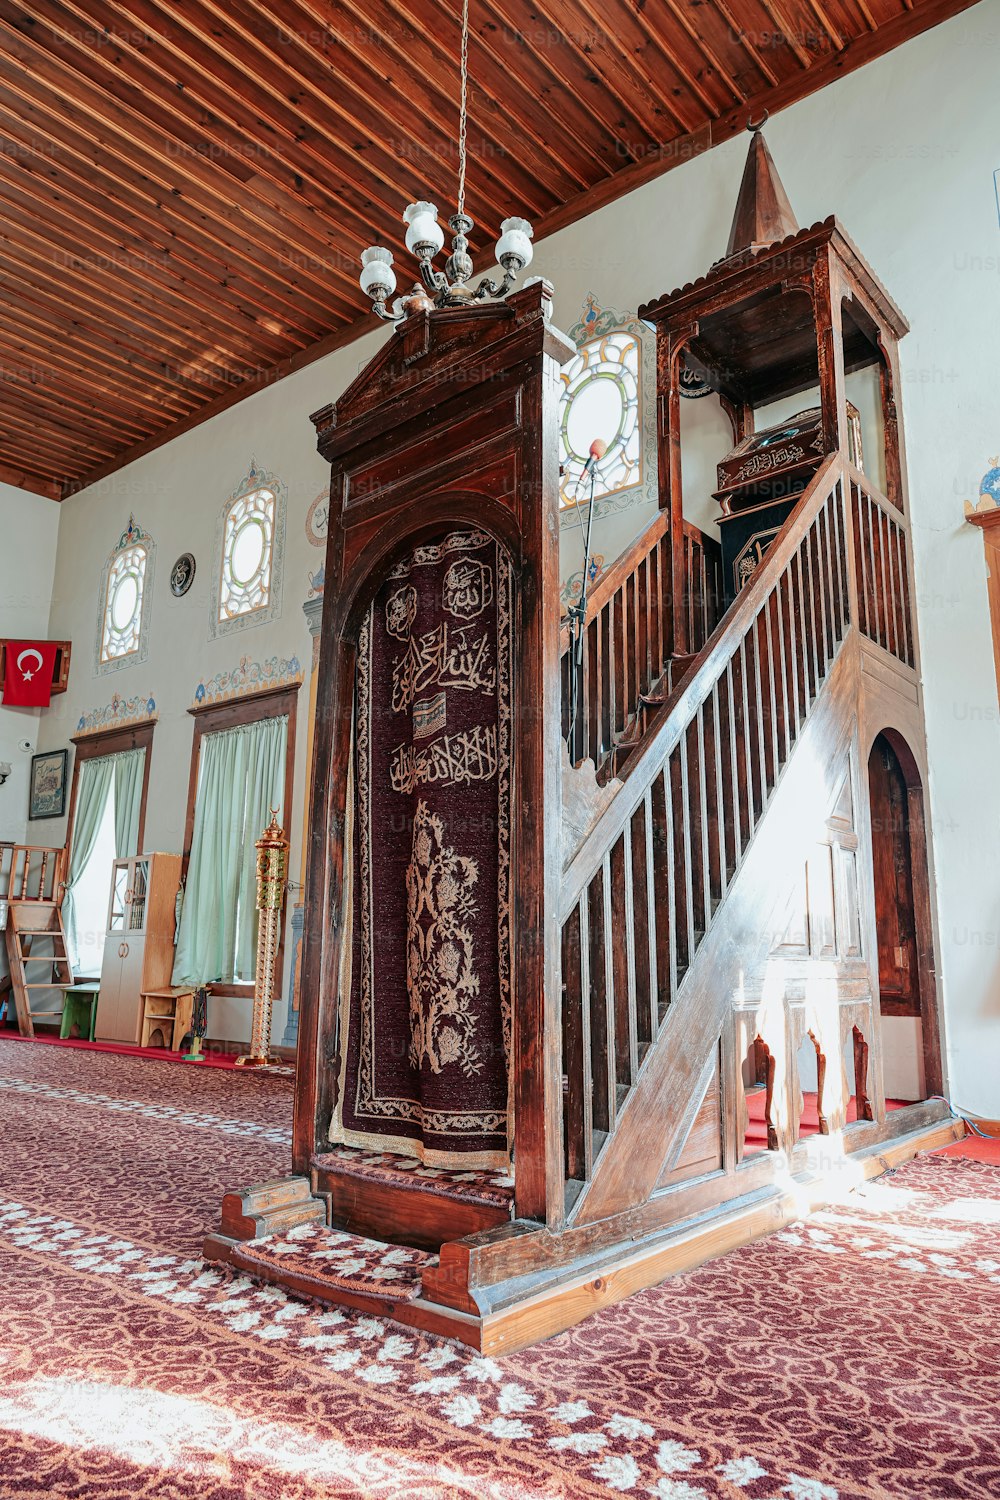 a large wooden grandfather clock sitting on top of a carpeted floor